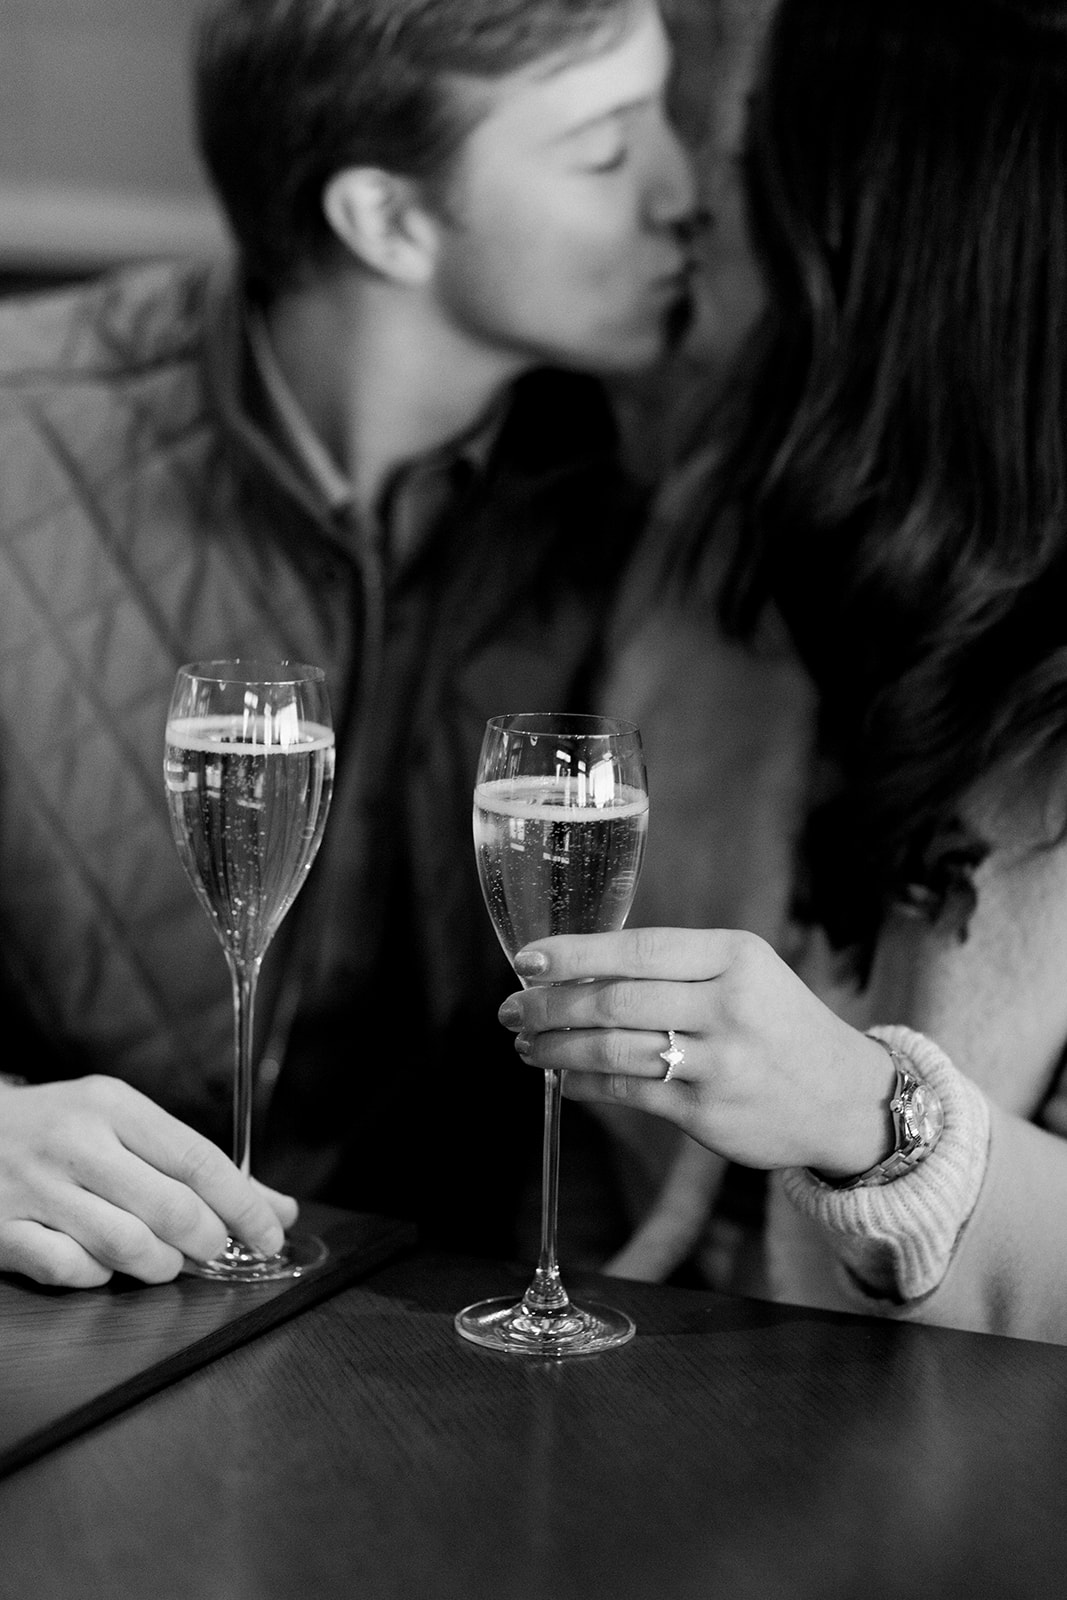 The couple toasting a glass of champagne inside the Stein Eriksen Lodge, Deer Valley. The image is in black and white and you can see both the woman and man holding a glass of bubble in each hand. The woman who was recently proposed to shows off her engagement ring.